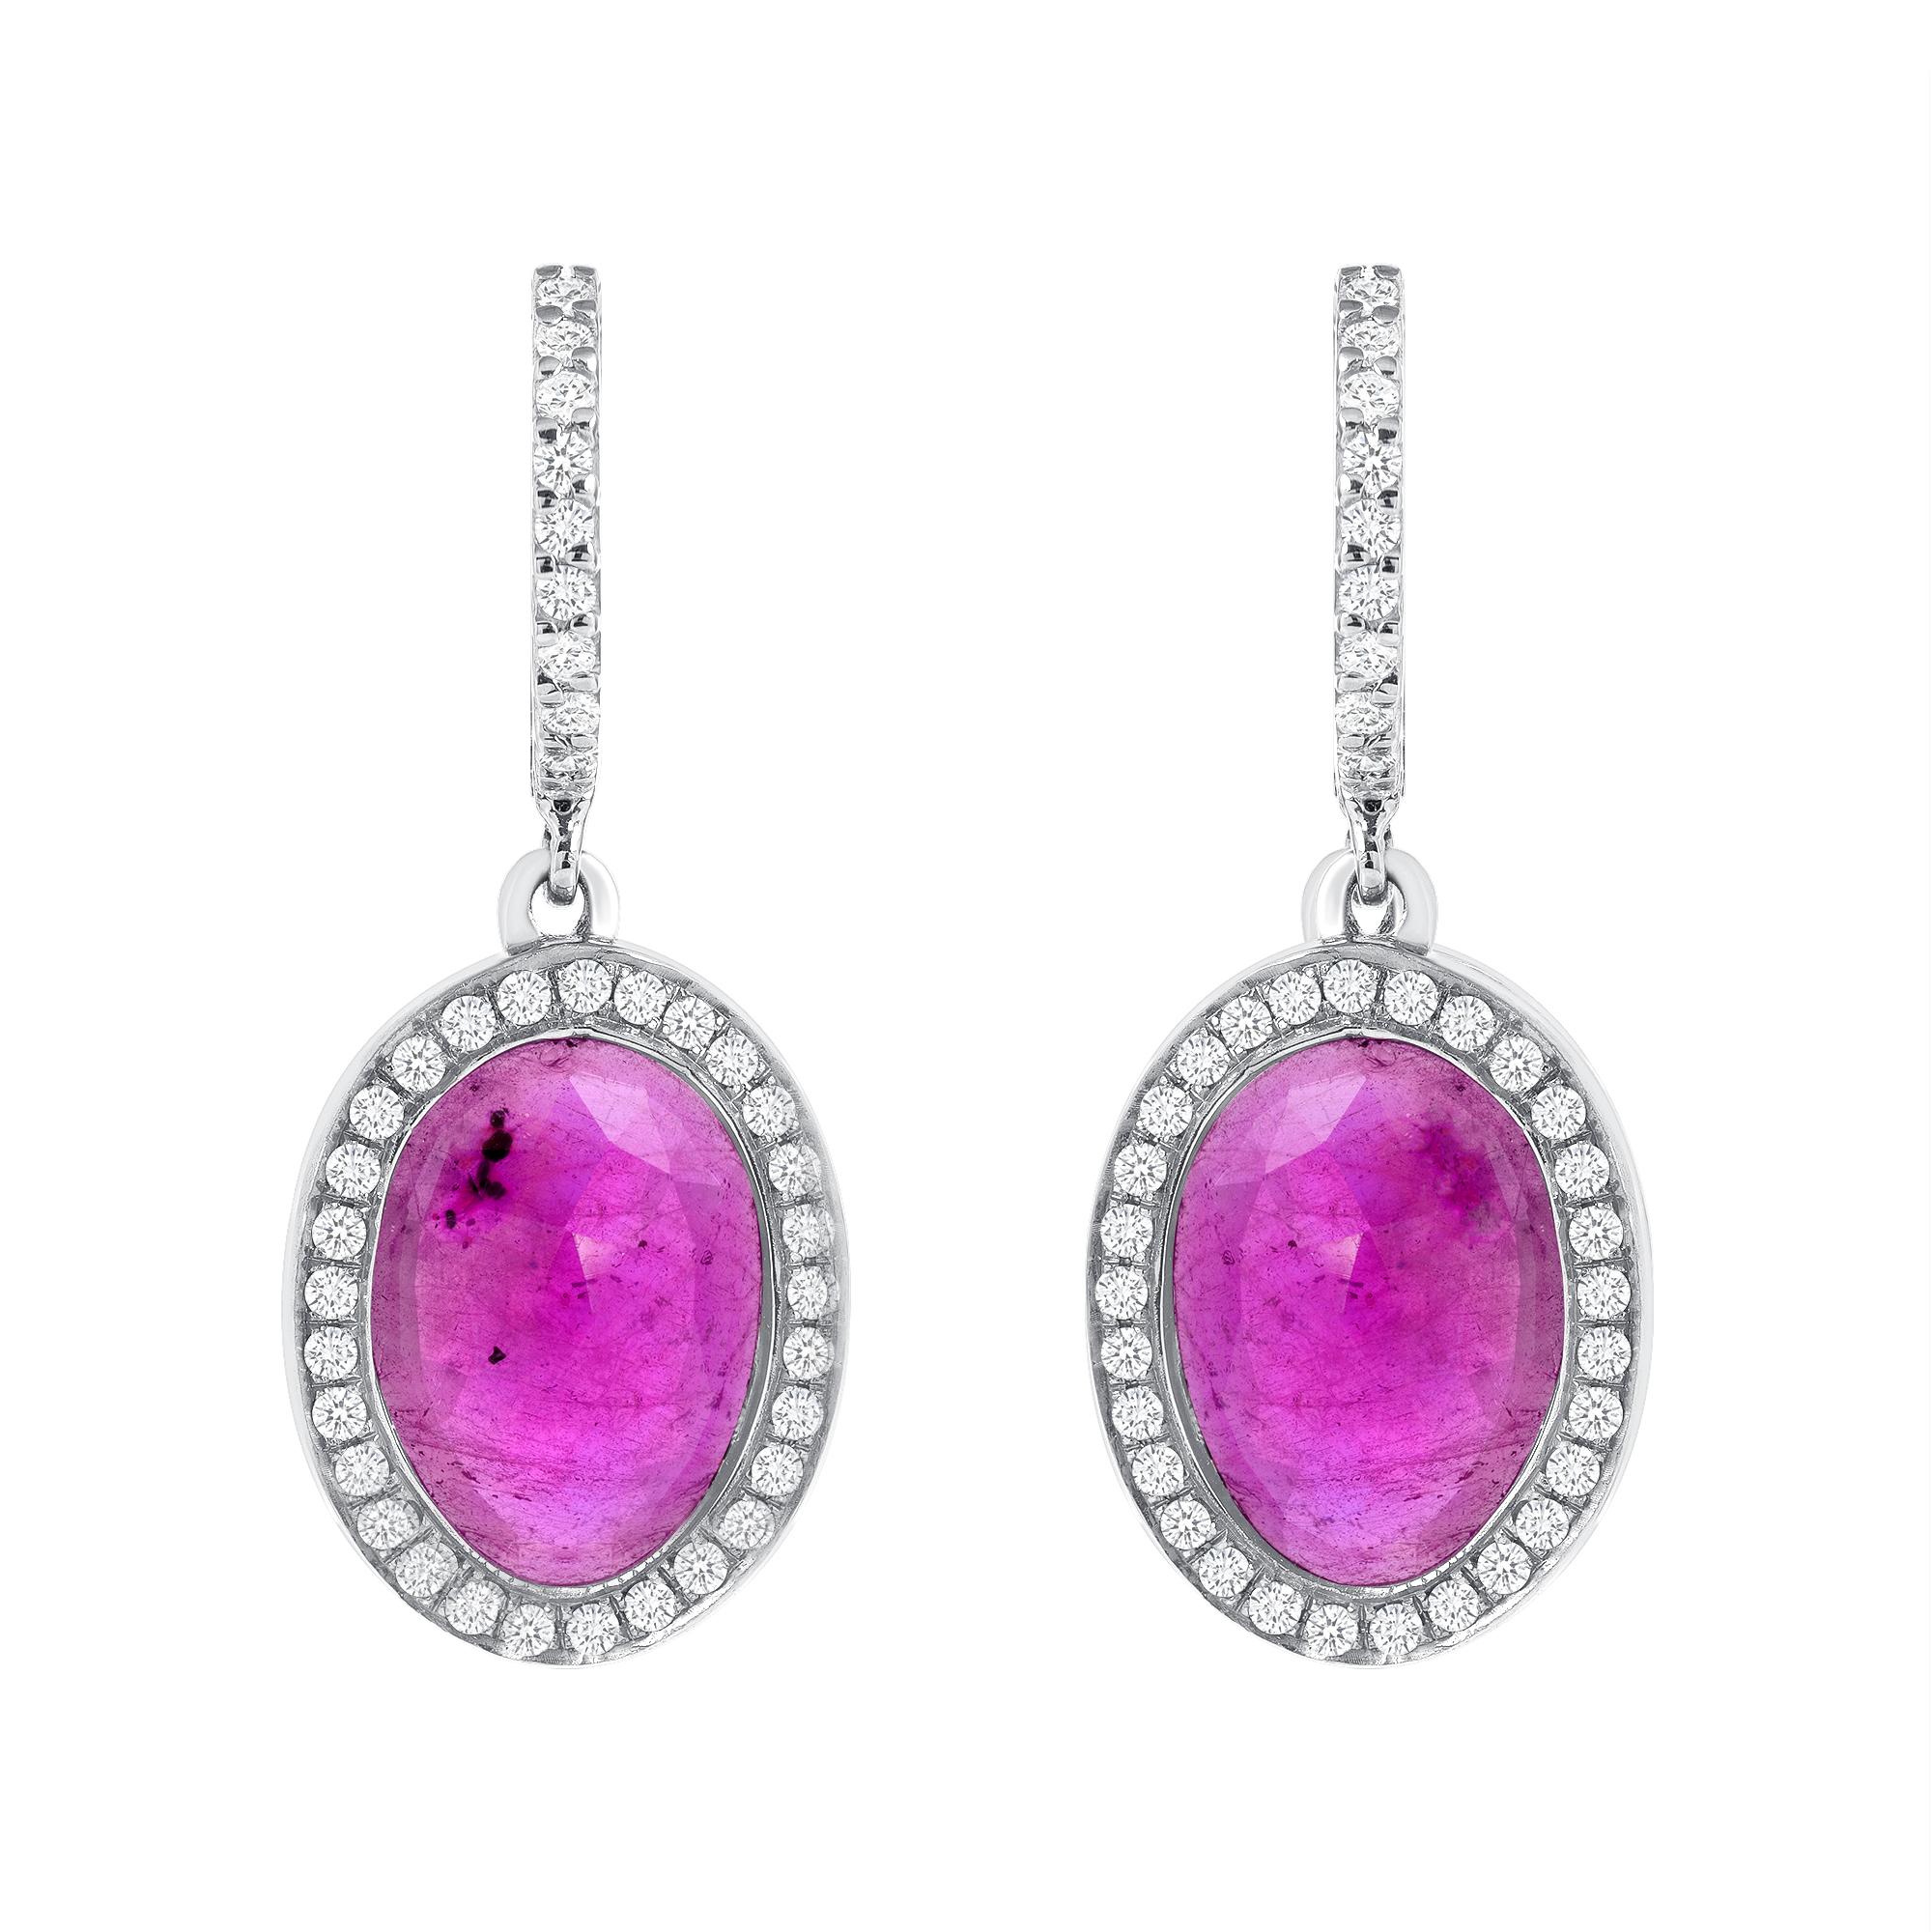 Ruby Earrings Set
White Gold with 1 carat 
Round Brilliant Genuine Diamond